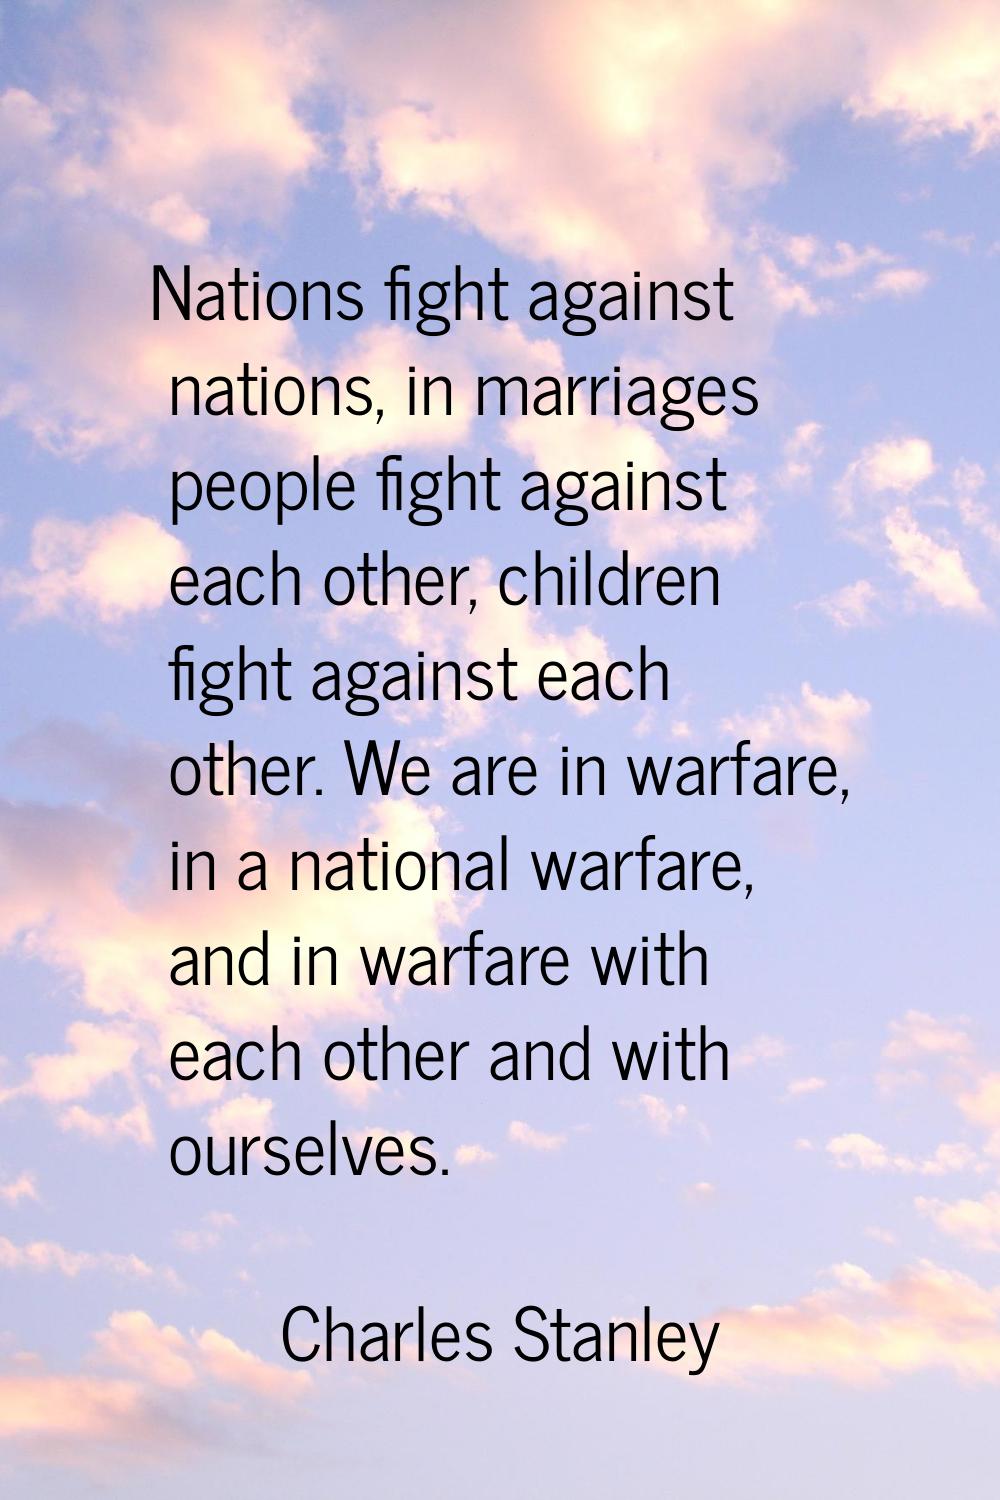 Nations fight against nations, in marriages people fight against each other, children fight against